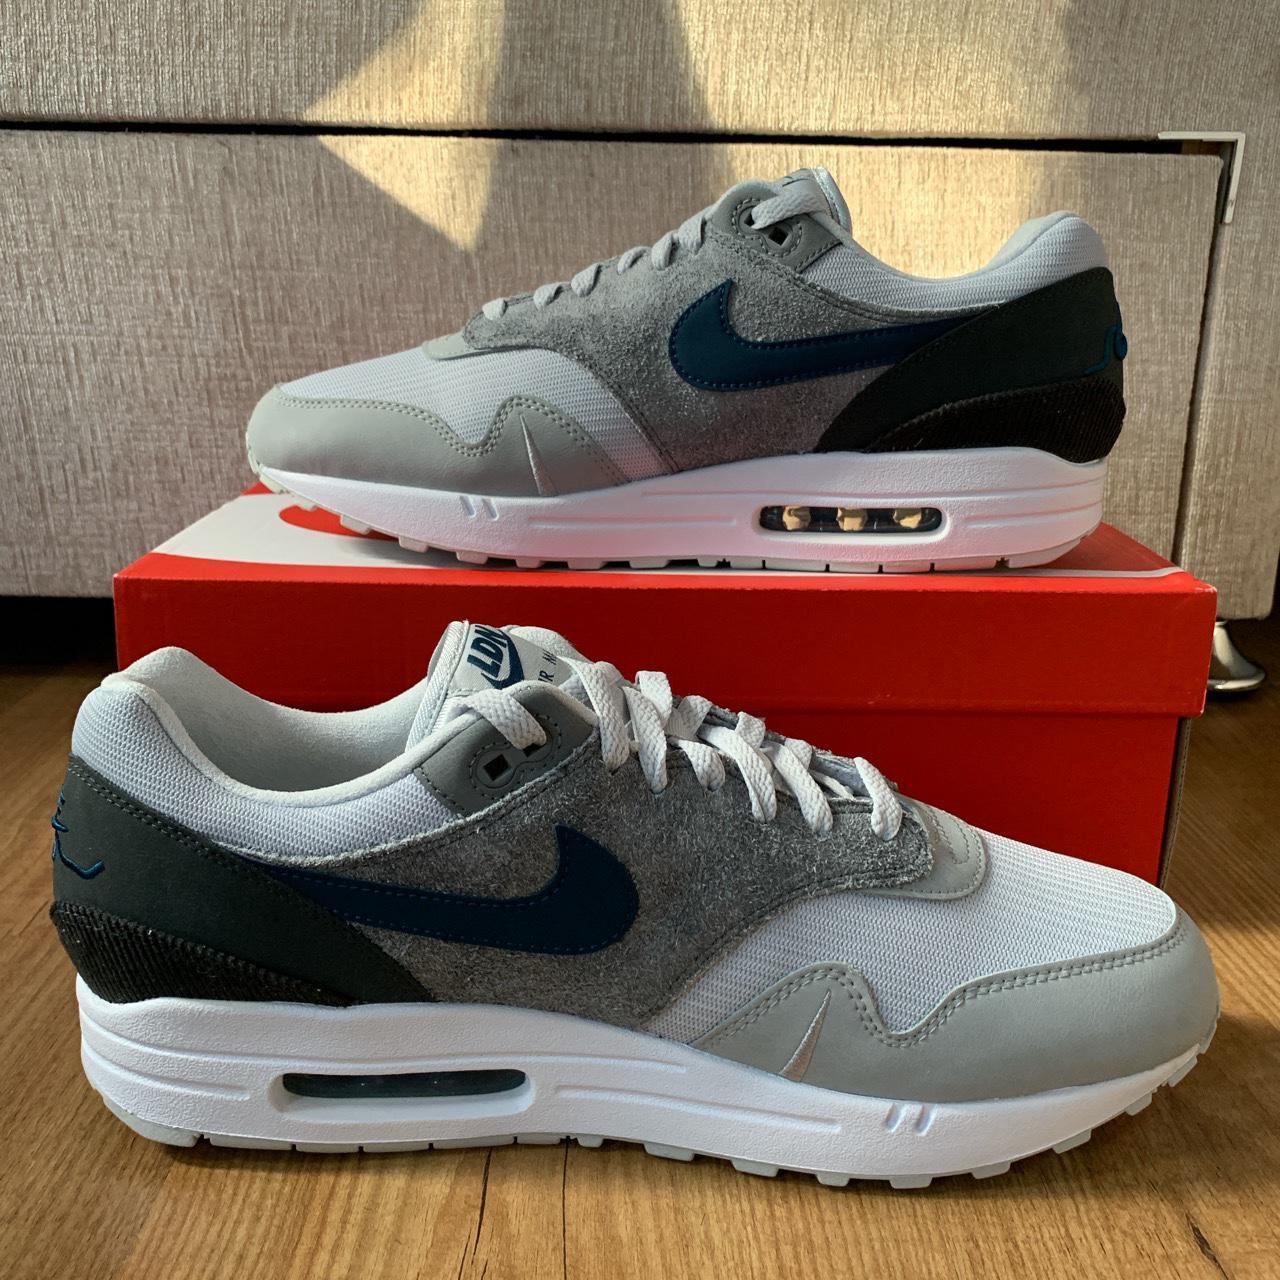 Product Image 1 - Nike Air max 1 ‘London’
Dead